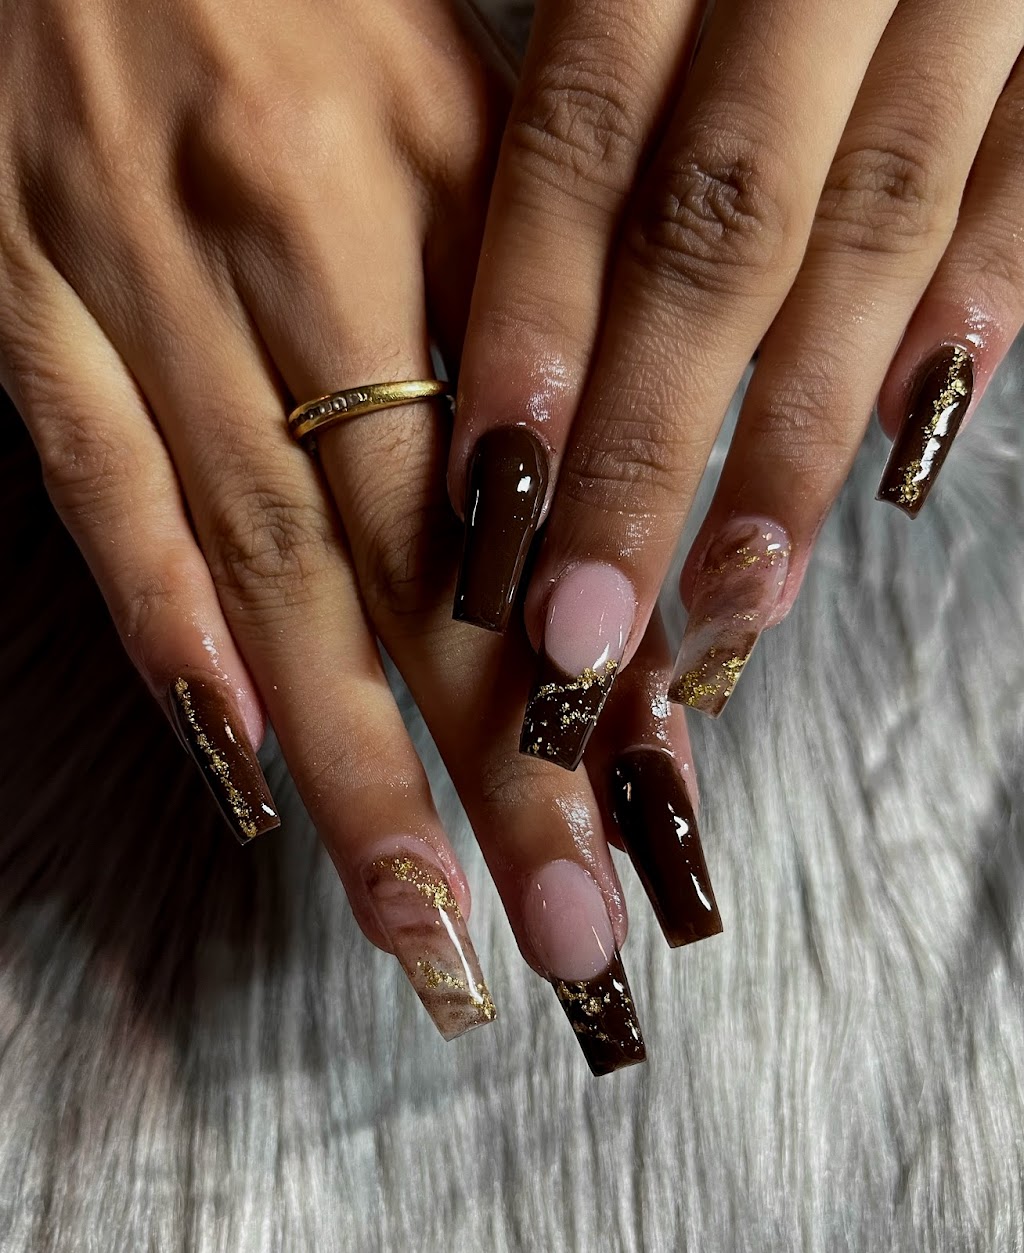 Nailsz By Nora | Royce Ave, Hamilton, ON L8G 4K8, Canada | Phone: (289) 456-2259